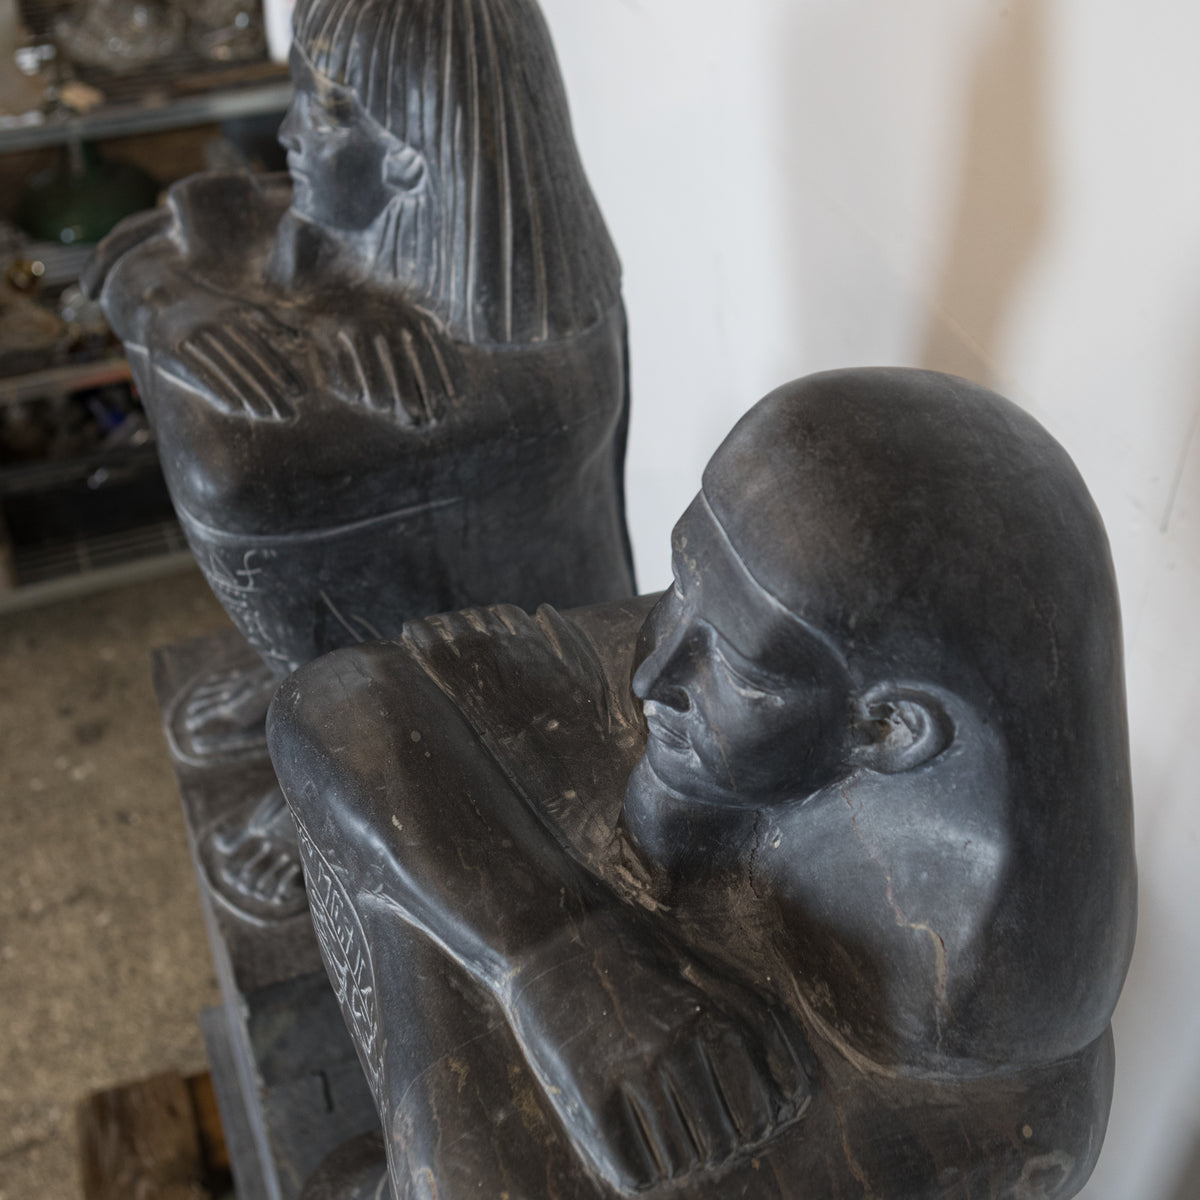 Pair of Monumental Egyptian Marble Block Statues with Plinths | The Architectural Forum